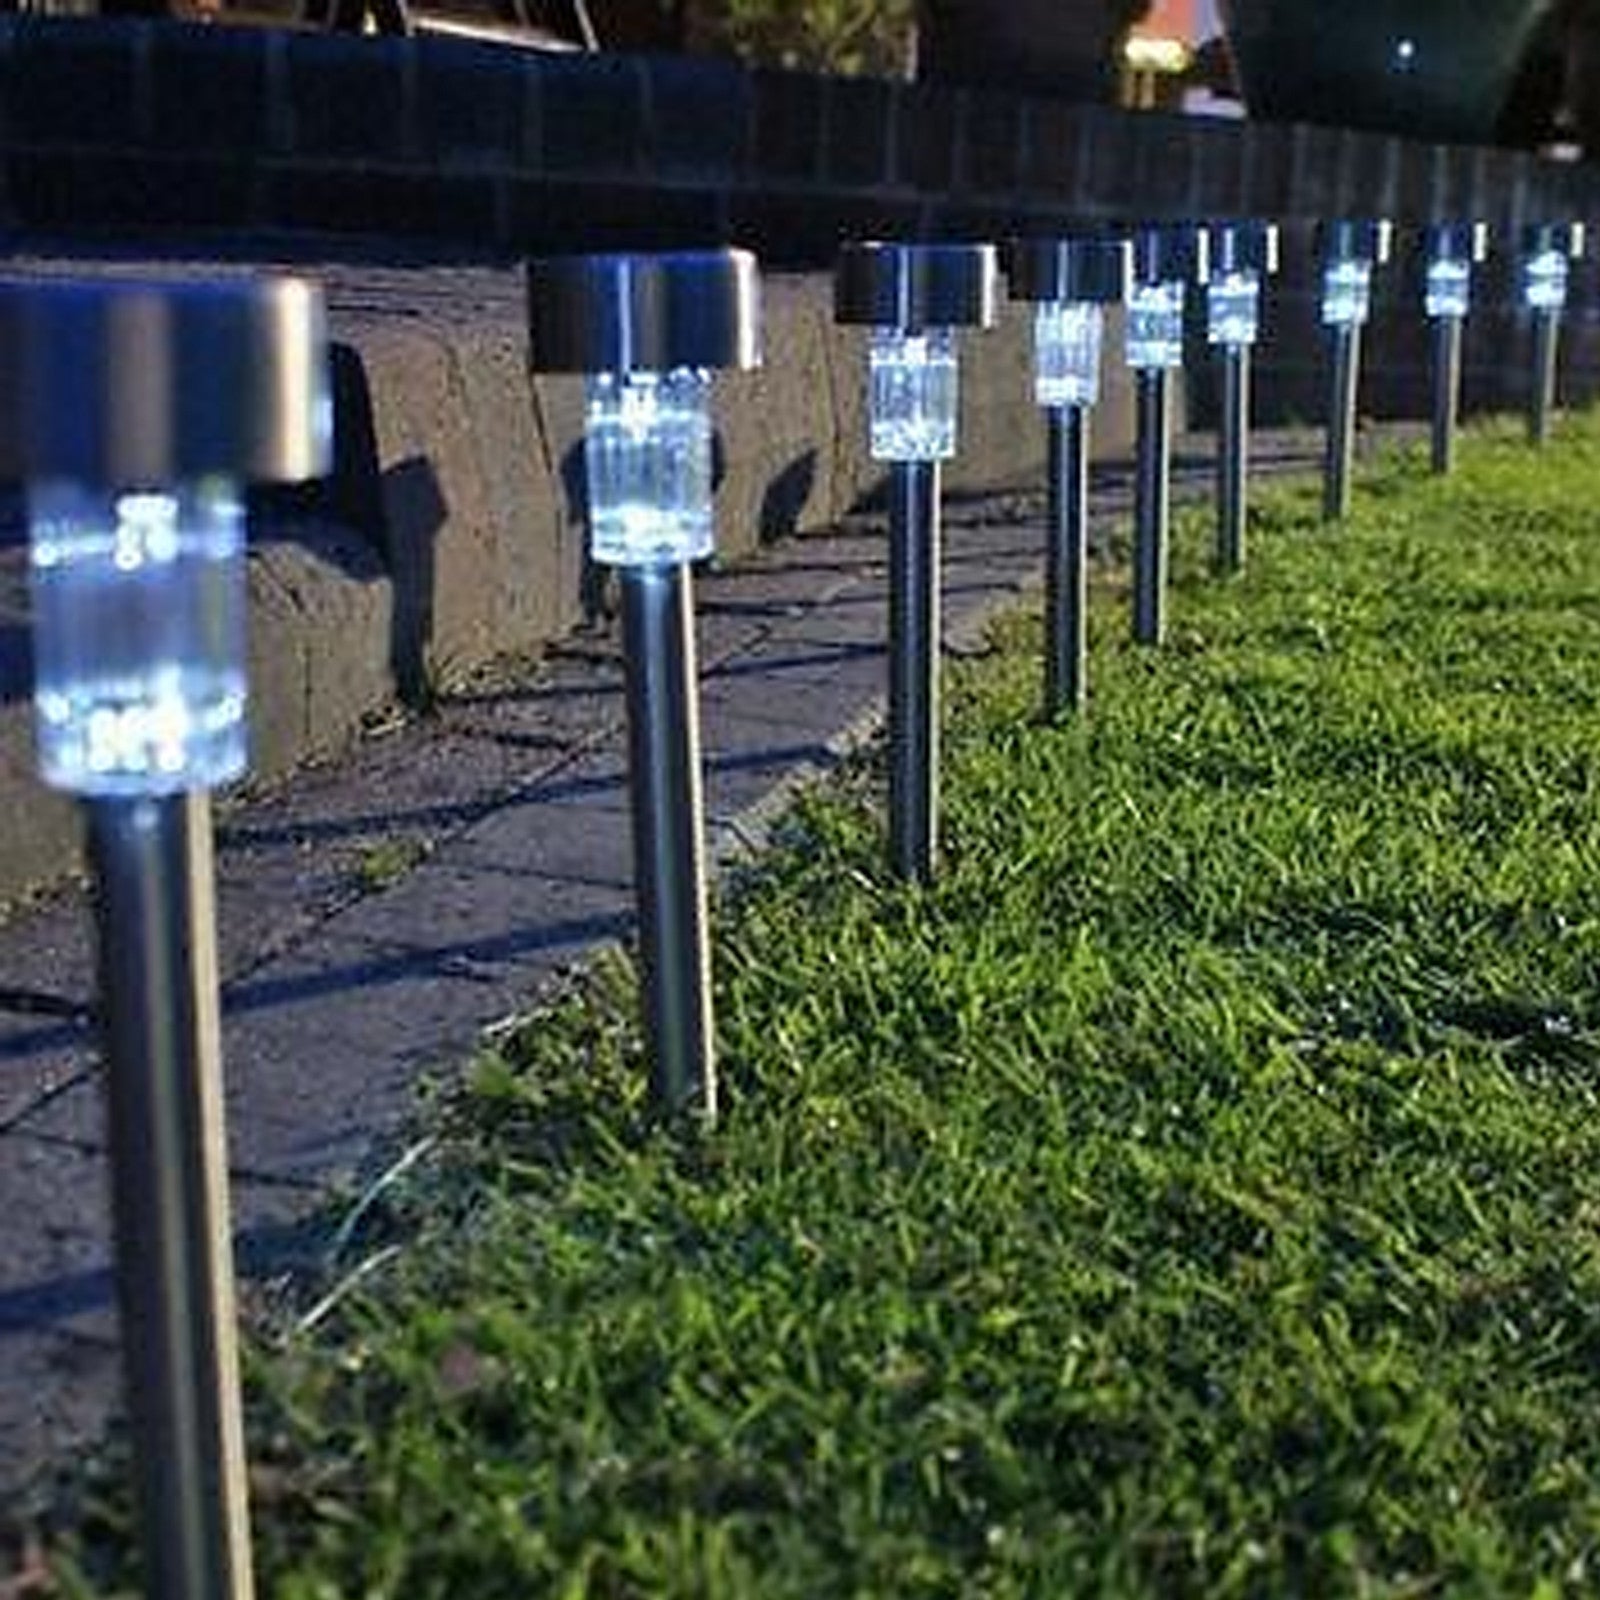 10 Piece Set of Stainless Steel Solar Lights